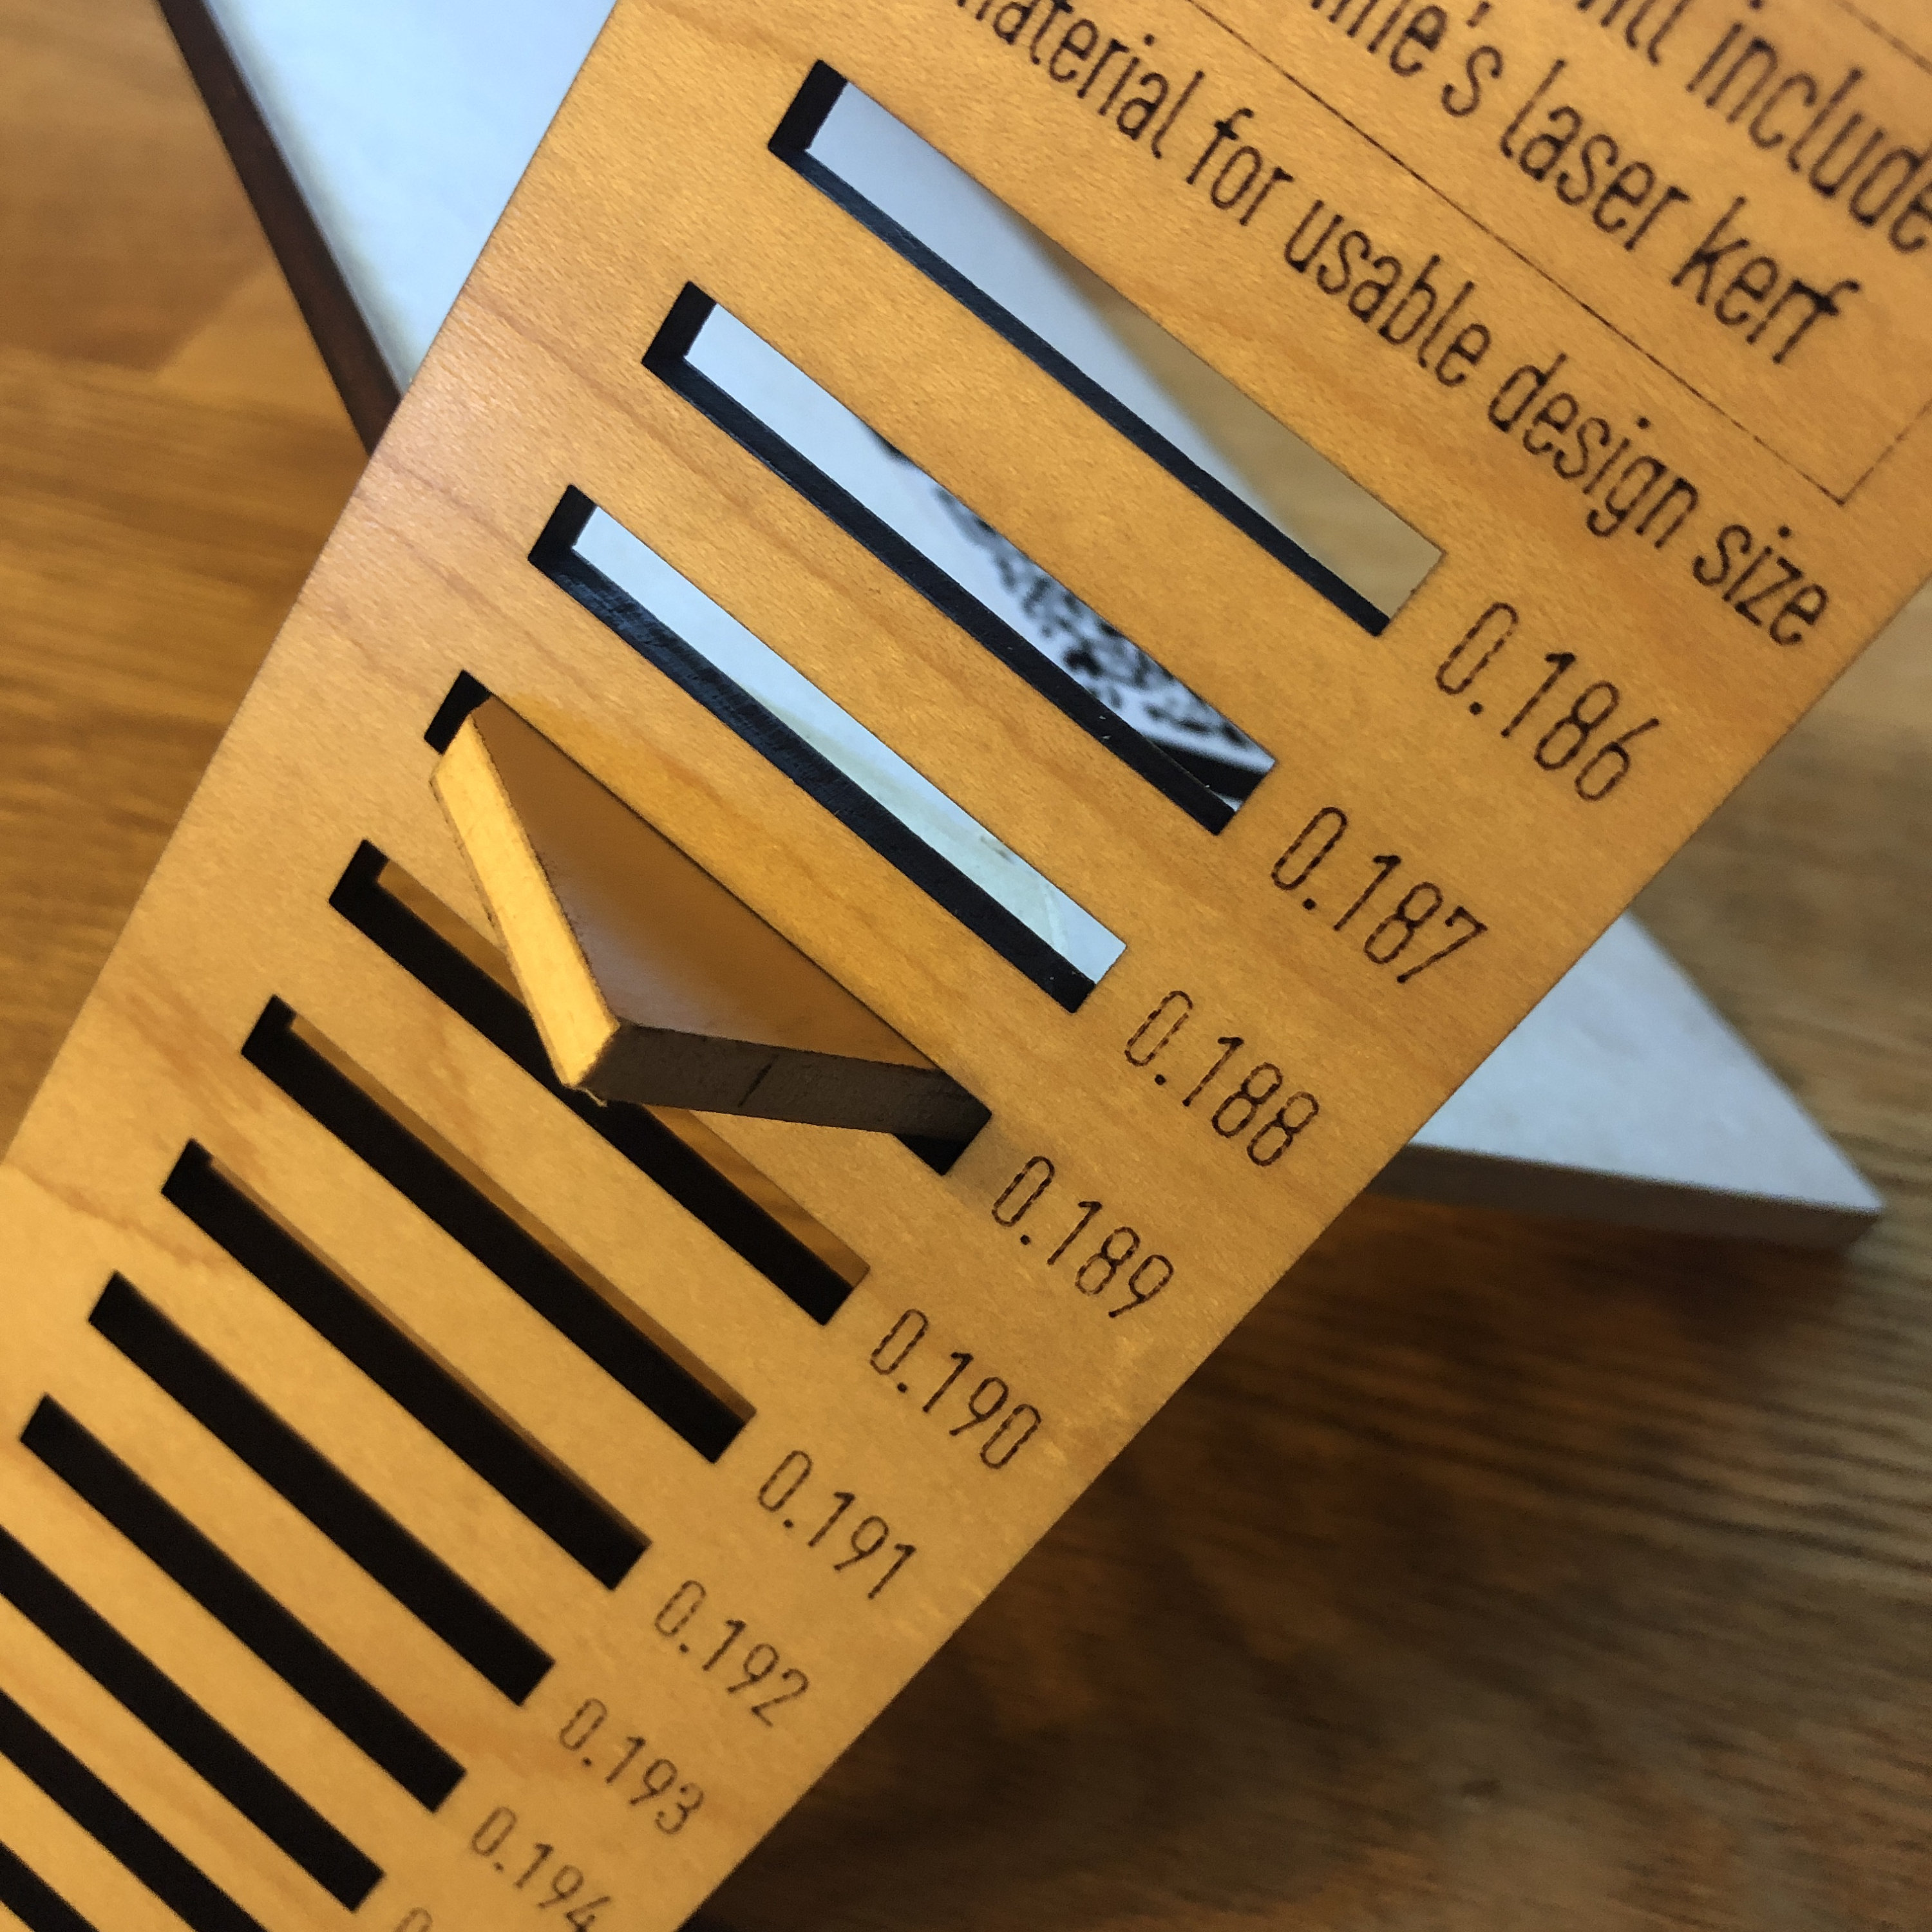 Some Gluing Tips - Everything Else - Glowforge Owners Forum